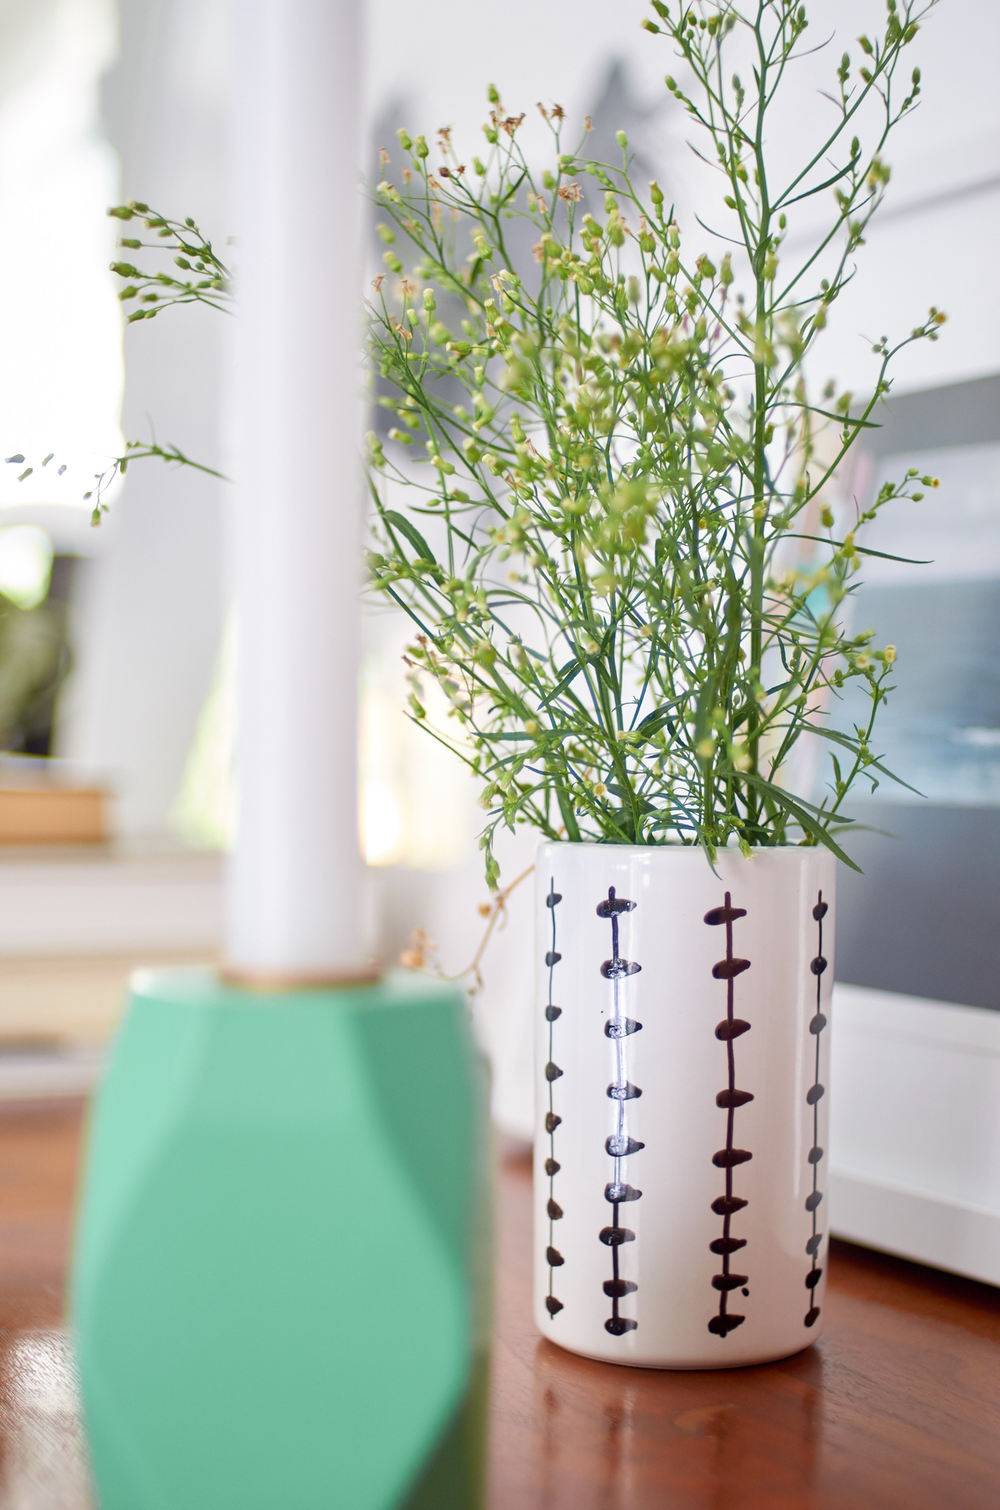 A plant is growing in a white and black vase on a desk.